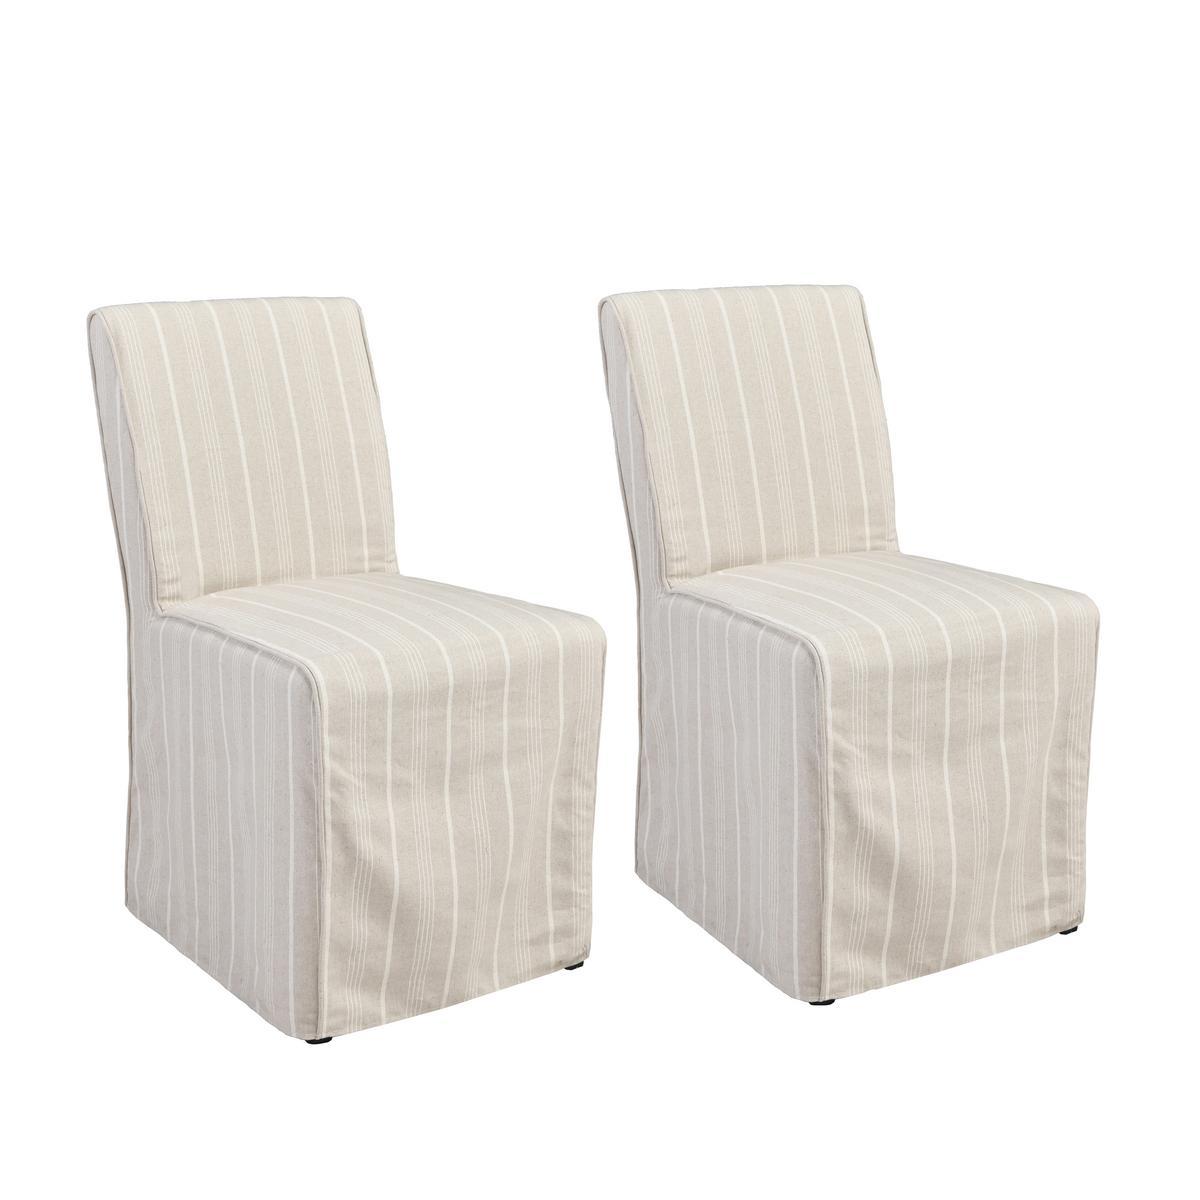 Amaya - Upholstered Dining Chair (Set of 2) - Beige